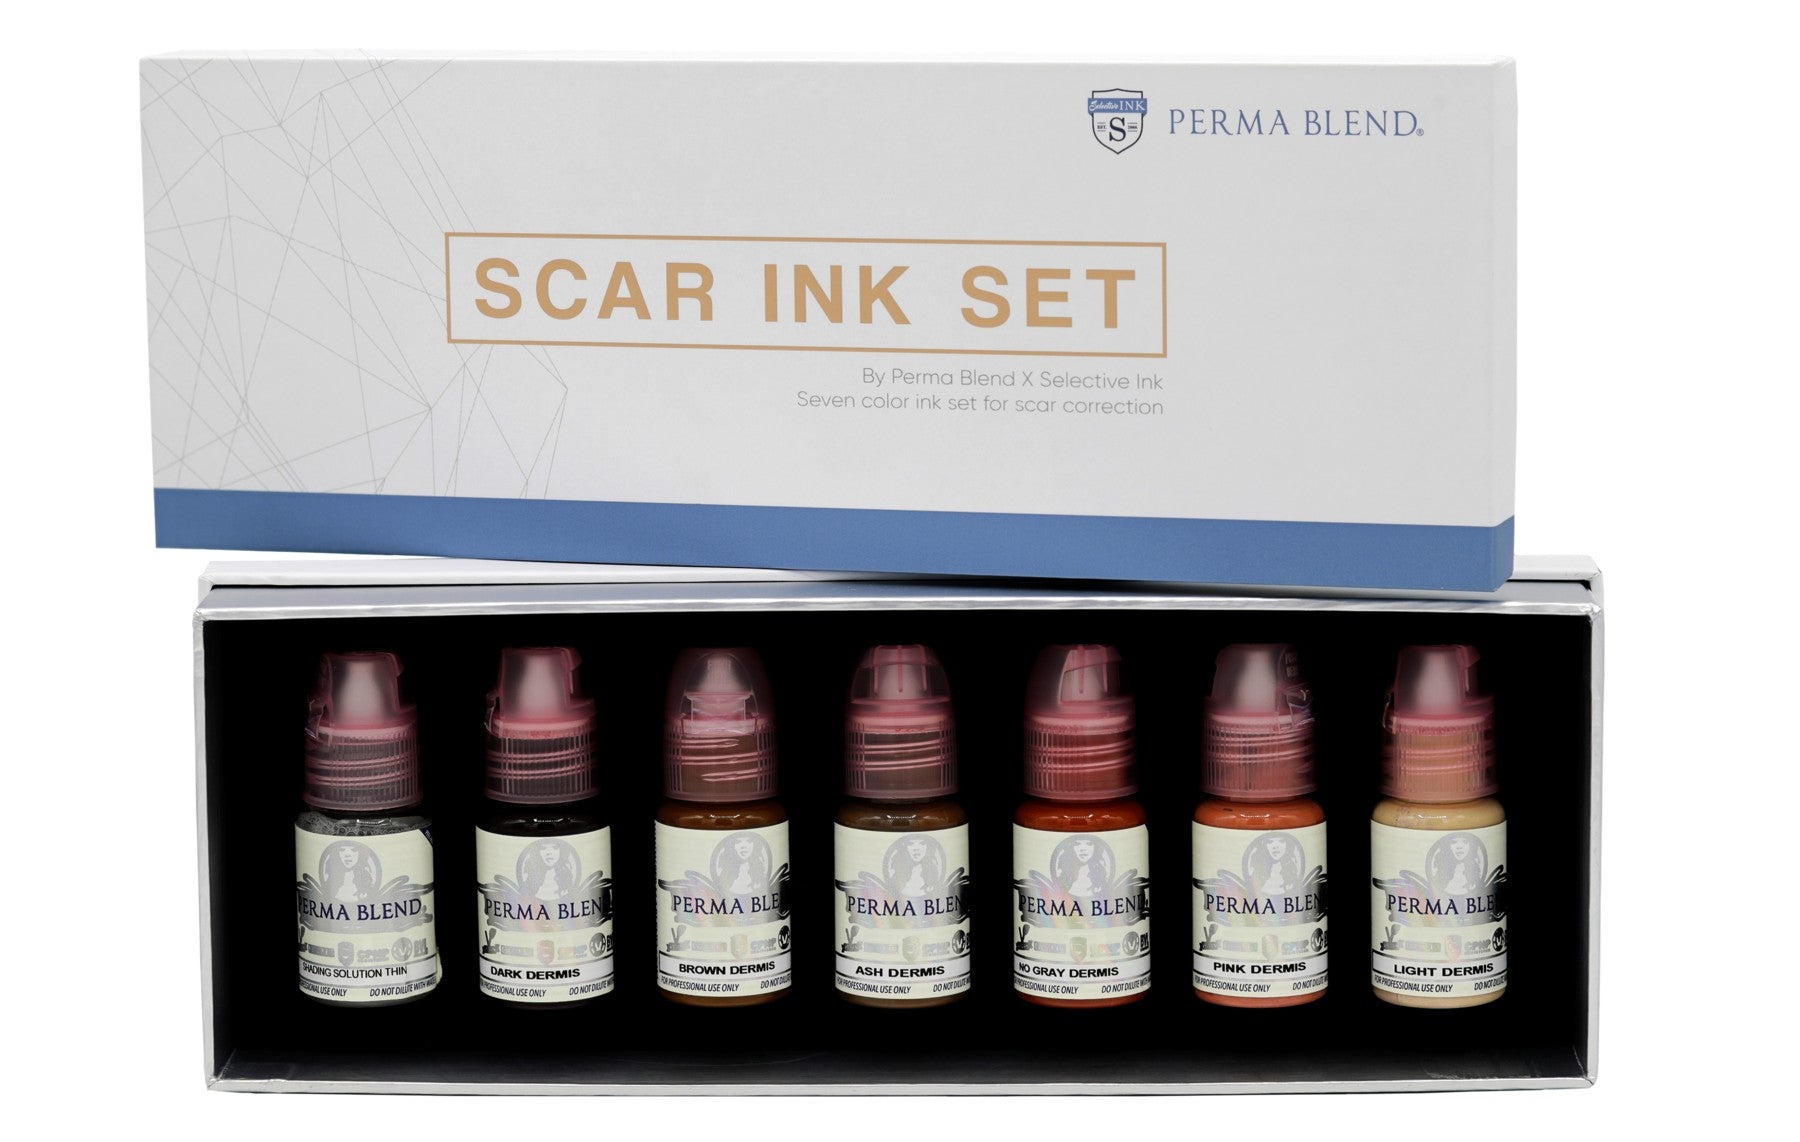 Th(INK) P(INK) - Sets for Mastectomy & Areola Reconstructive Tattoos